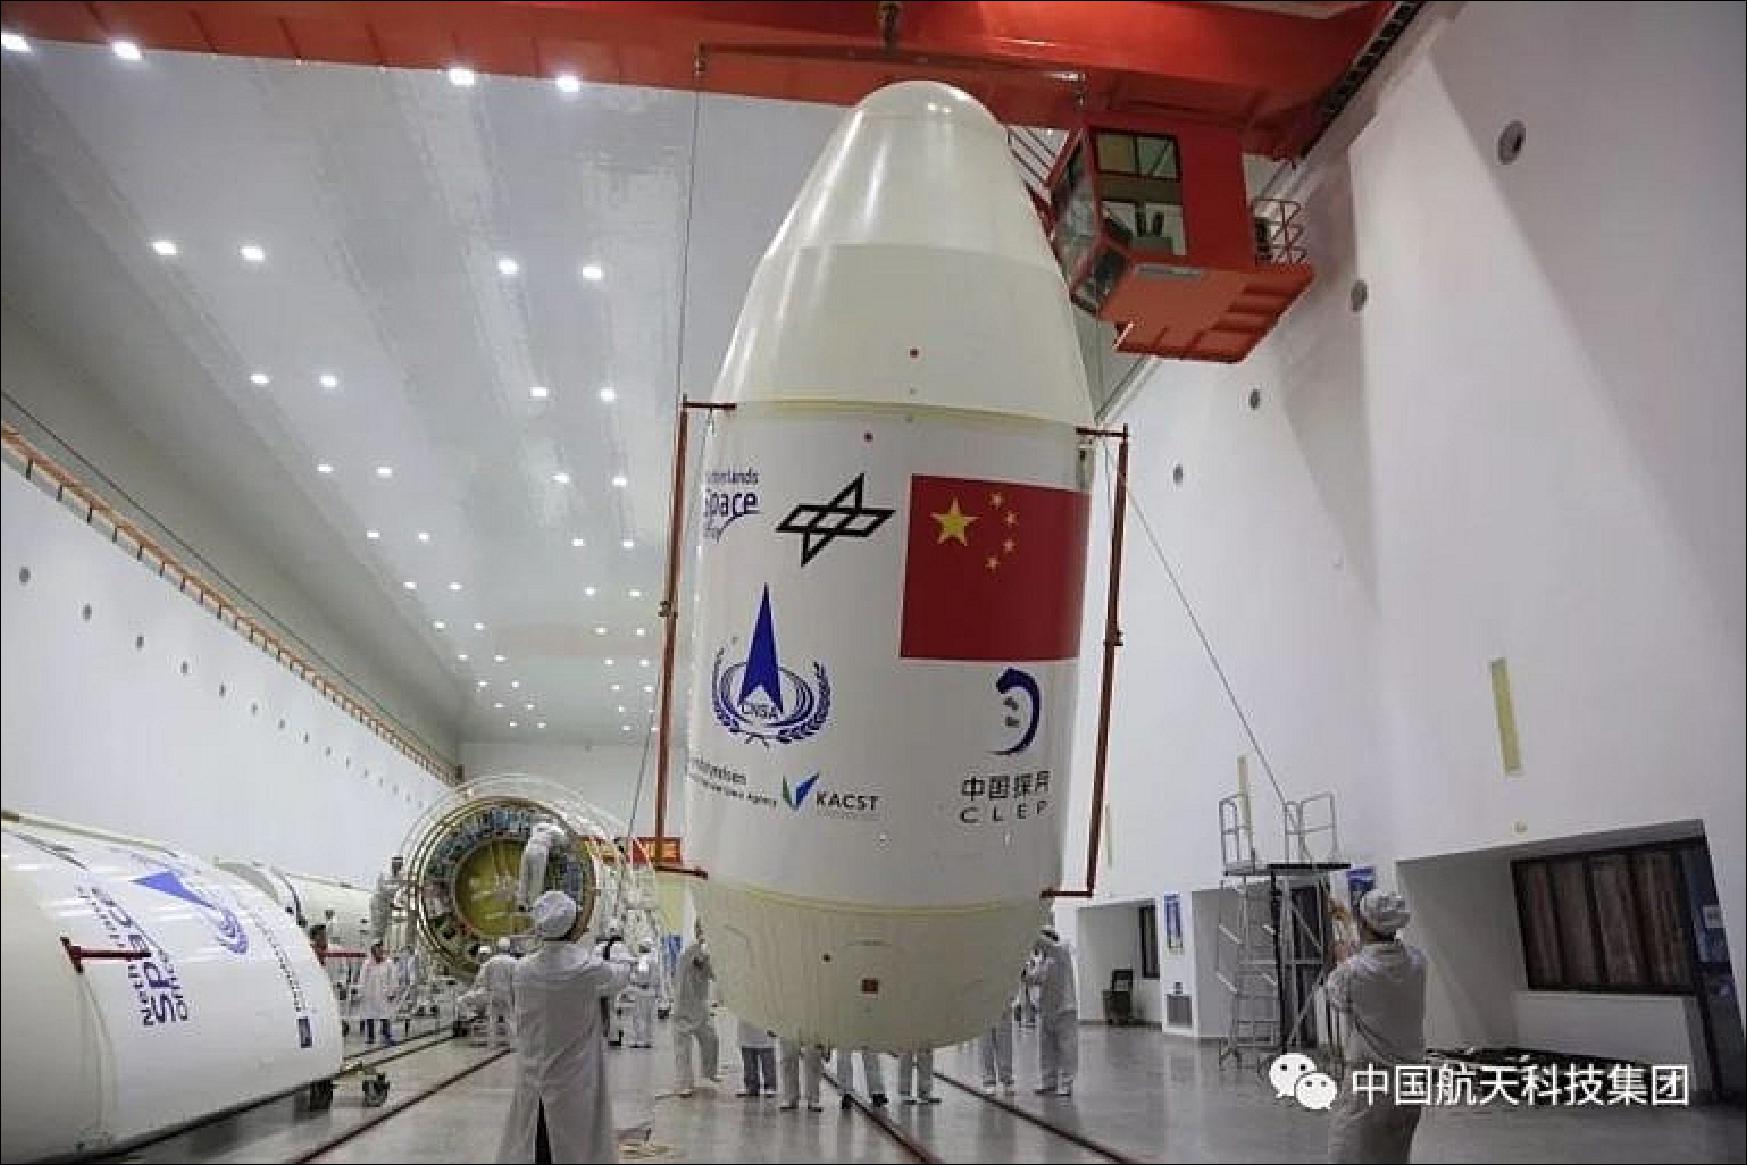 Figure 5: Payload fairing for the Chang’e-4 lunar far side mission (image credit: CASC)